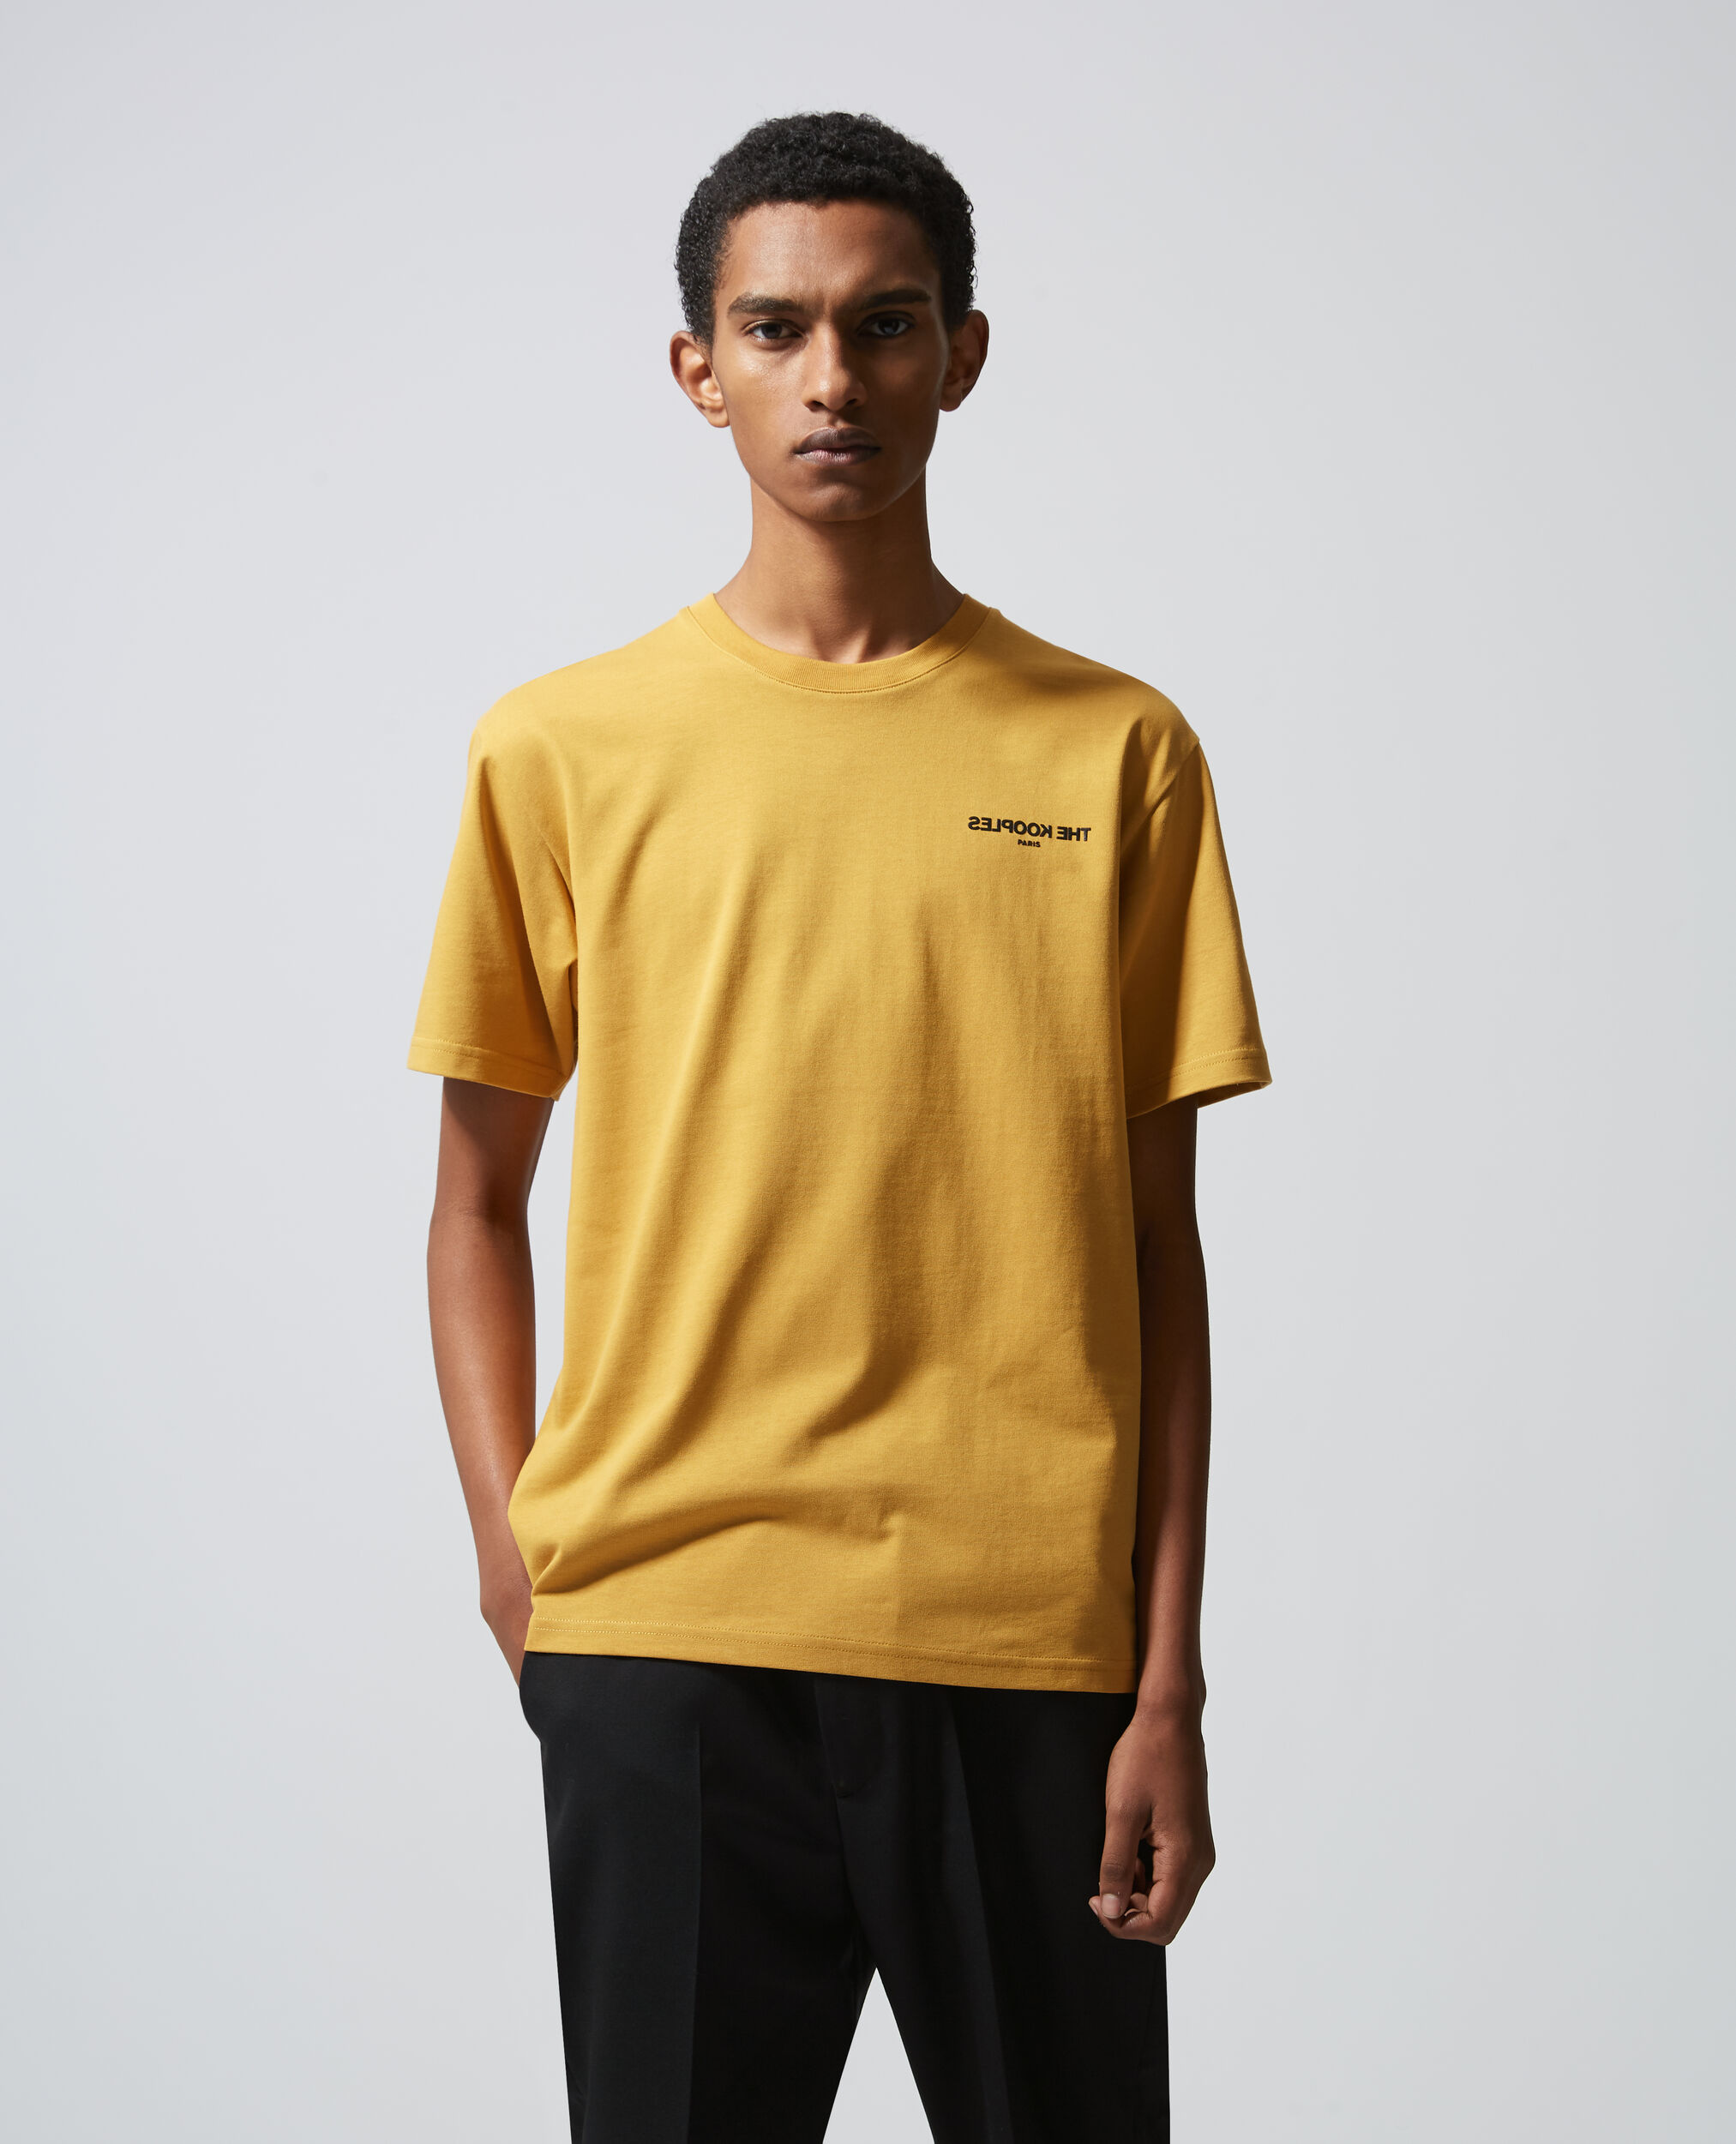 T-shirt coton logo The Kooples moutarde, MUSTARD, hi-res image number null